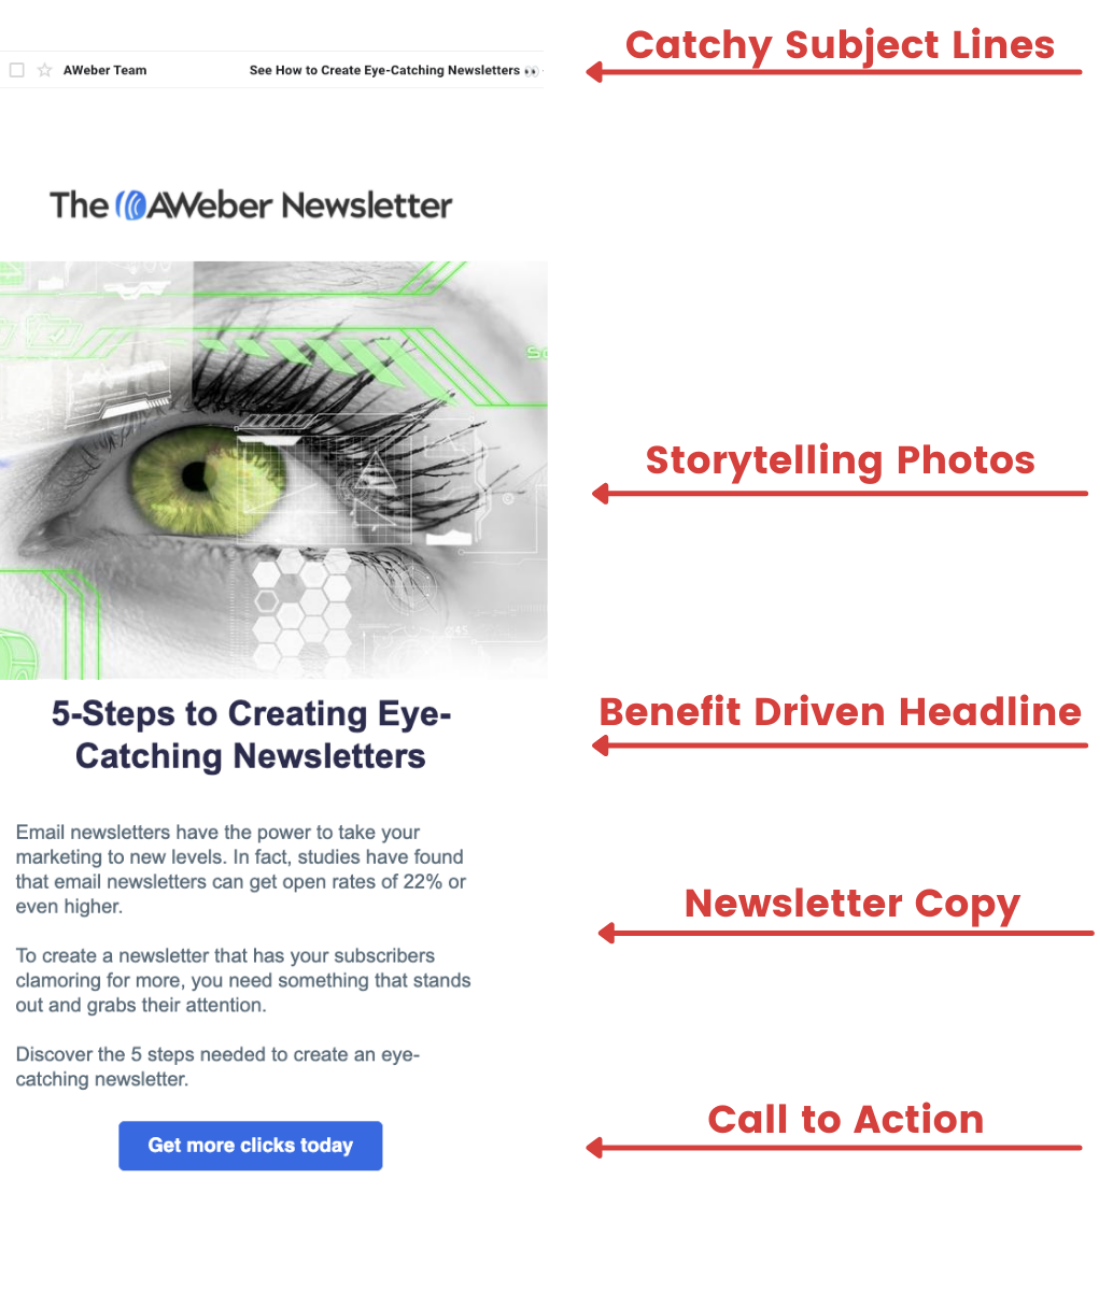 5 steps to creating eye-catching newsletters - Learn about five essential elements of an effective email newsletter - Image